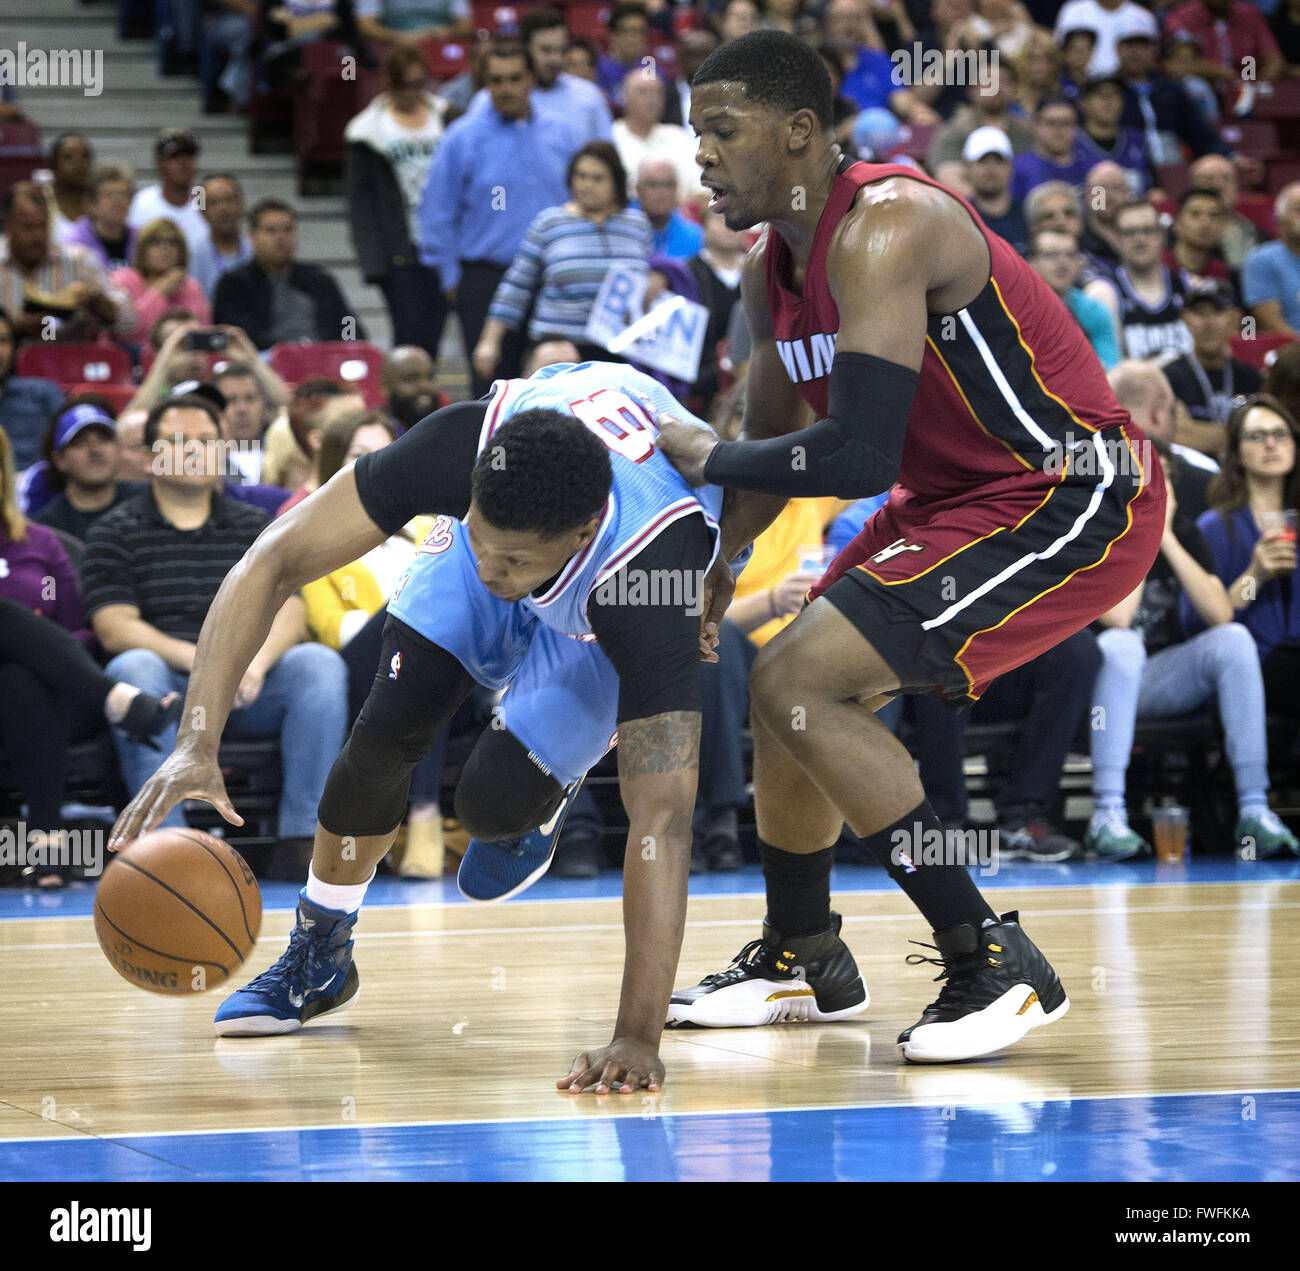 Sacramento, CA, USA. 1st Apr, 2016. Sacramento Kings forward Rudy Gay (8) loses his balance but keeps possession on this drive in first quarter action. Miami Heat forward Joe Johnson (2) defends. Sacramento Kings against the Miami Heat on Friday, April1, 2016 at Sleep Train Arena in Sacrament, Calif. © Hector Amezcua/Sacramento Bee/ZUMA Wire/Alamy Live News Stock Photo